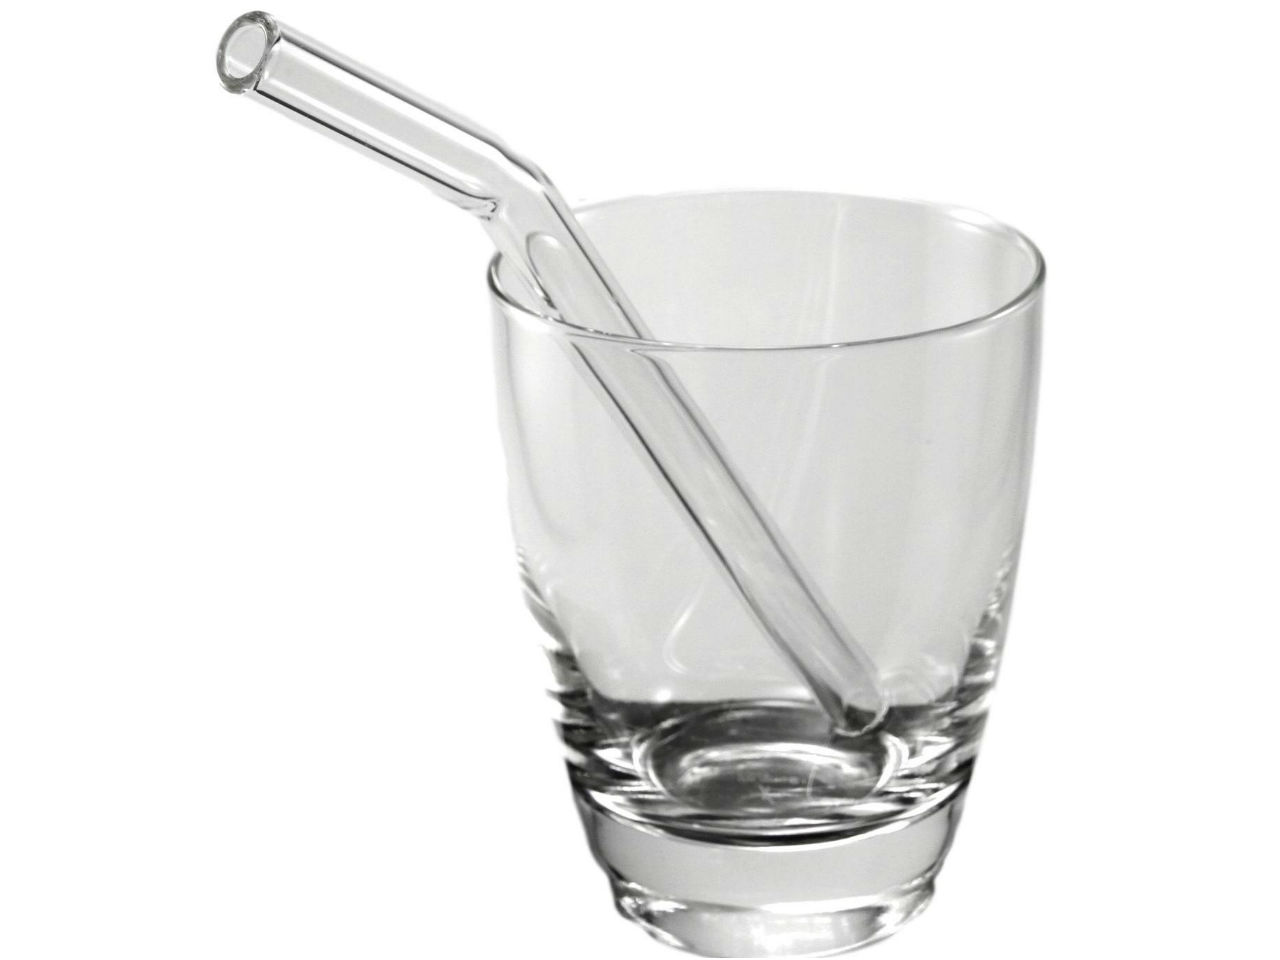 Glass straw in glass cup